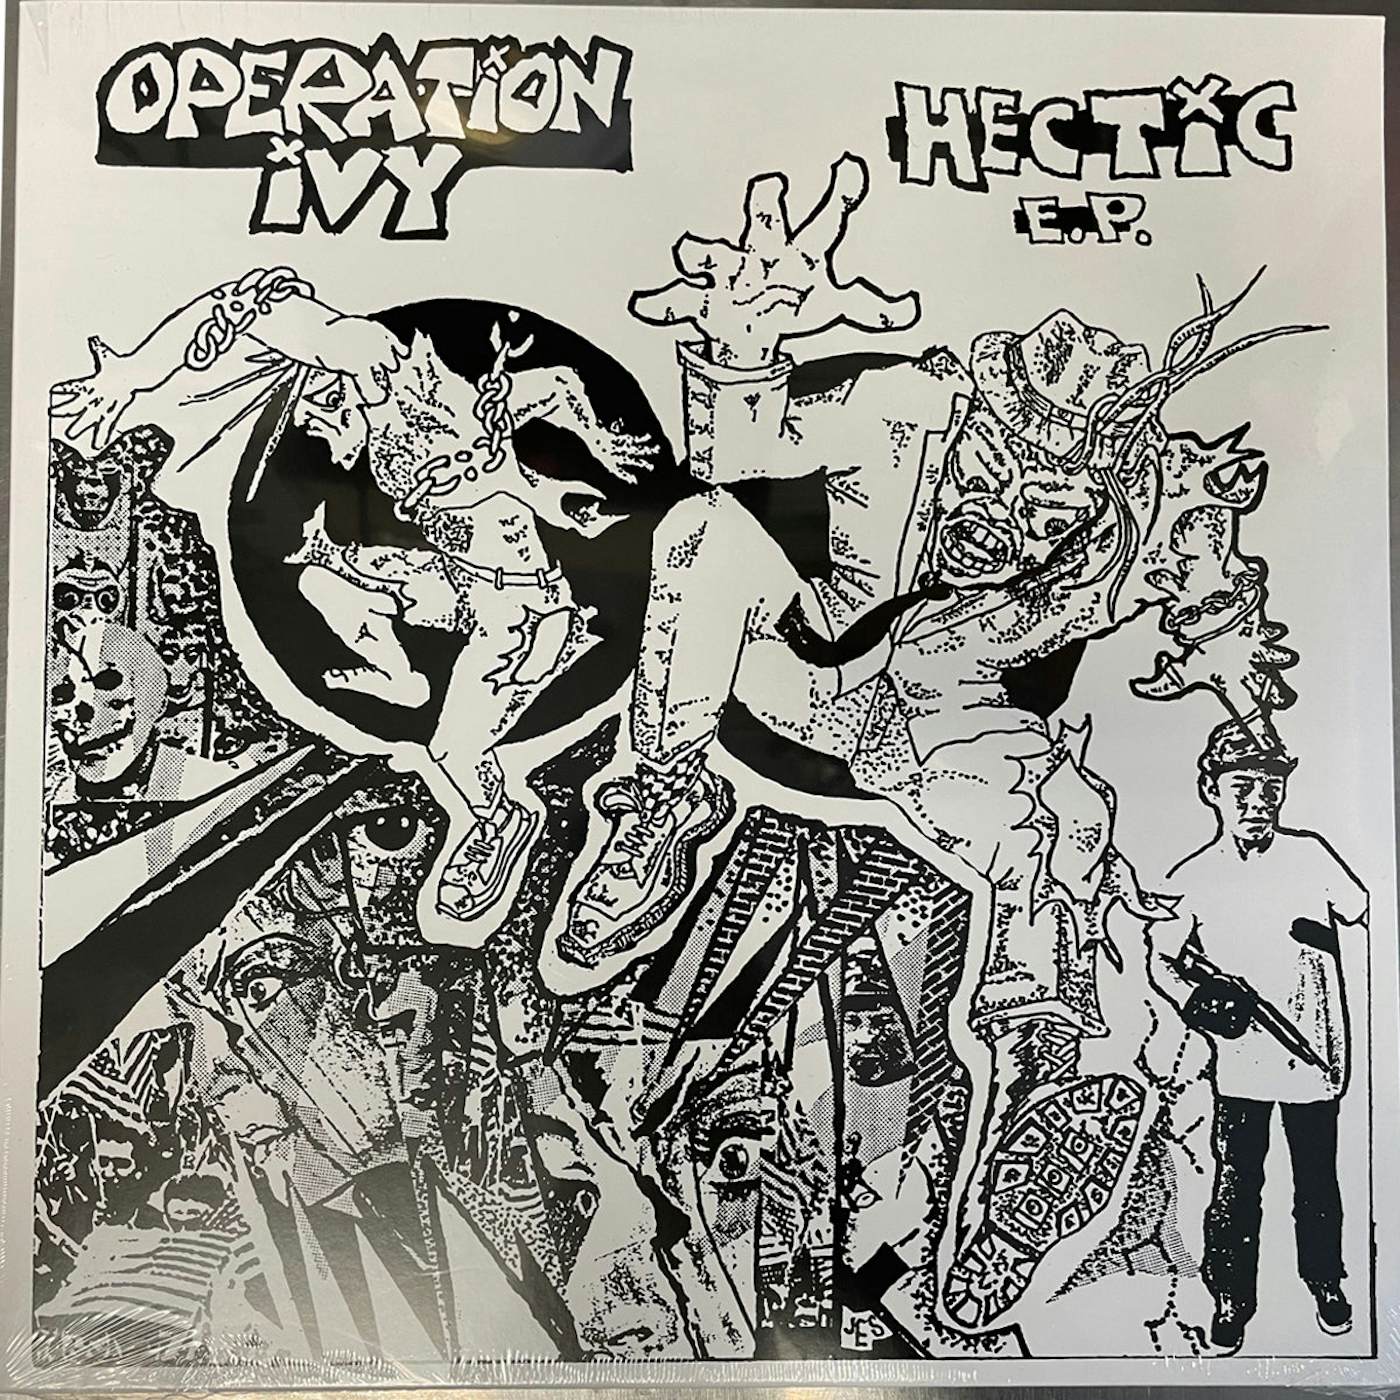 Operation Ivy "Hectic" EP